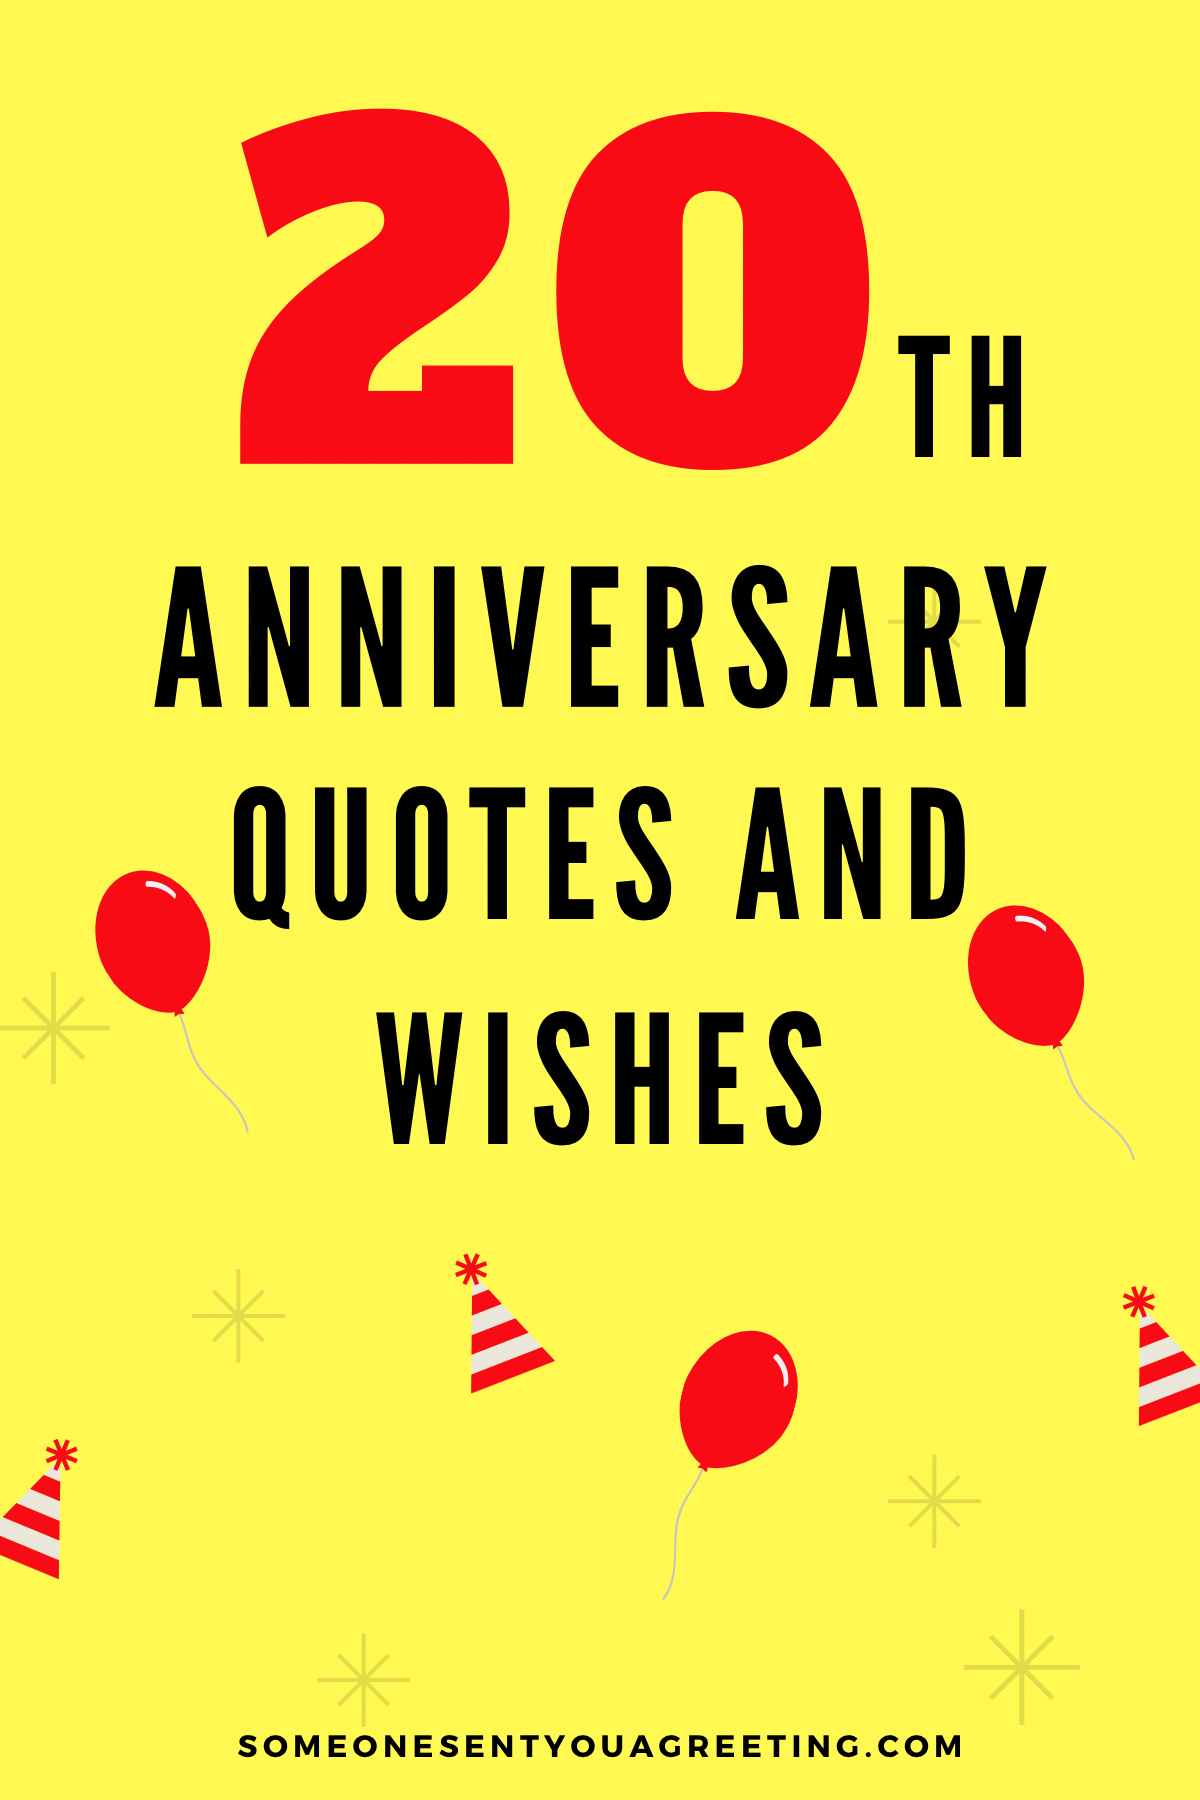 20th anniversary quotes